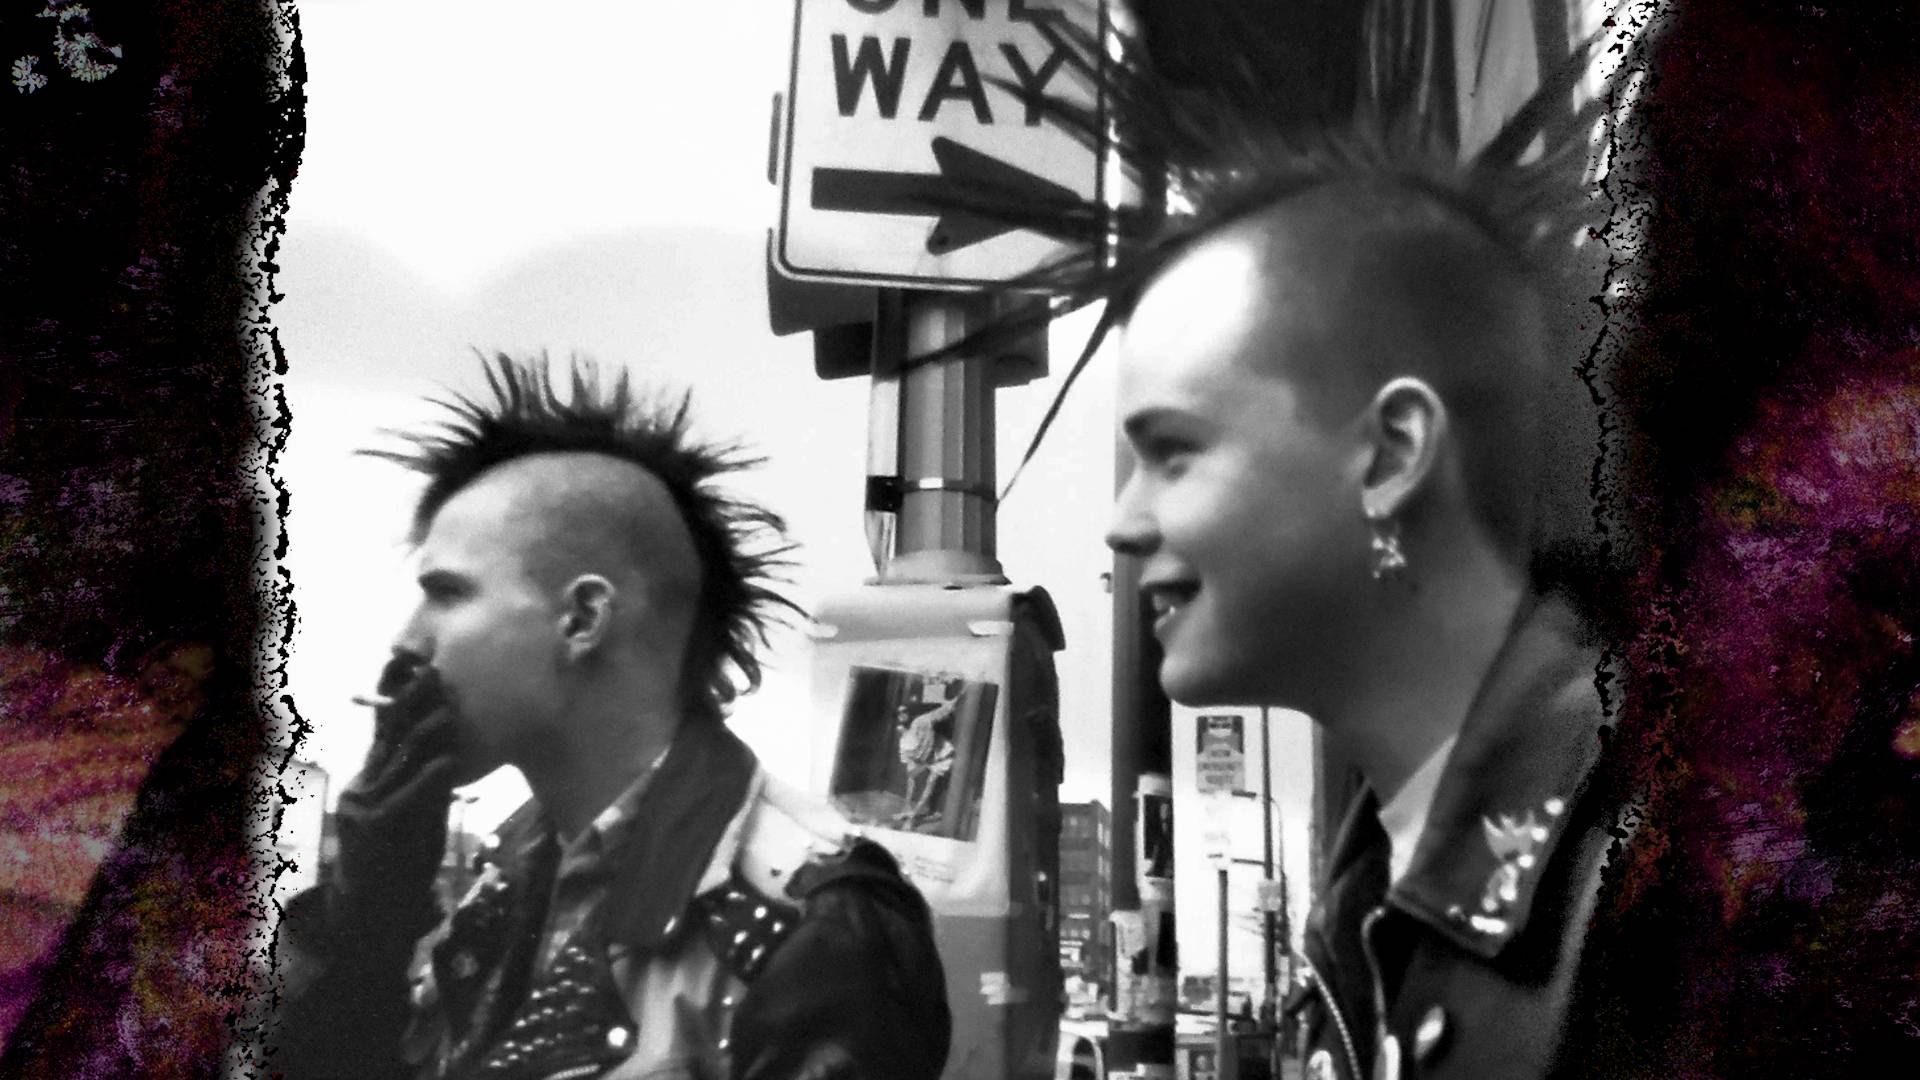 Uptown punks. Photo by Michelle Bigelow.